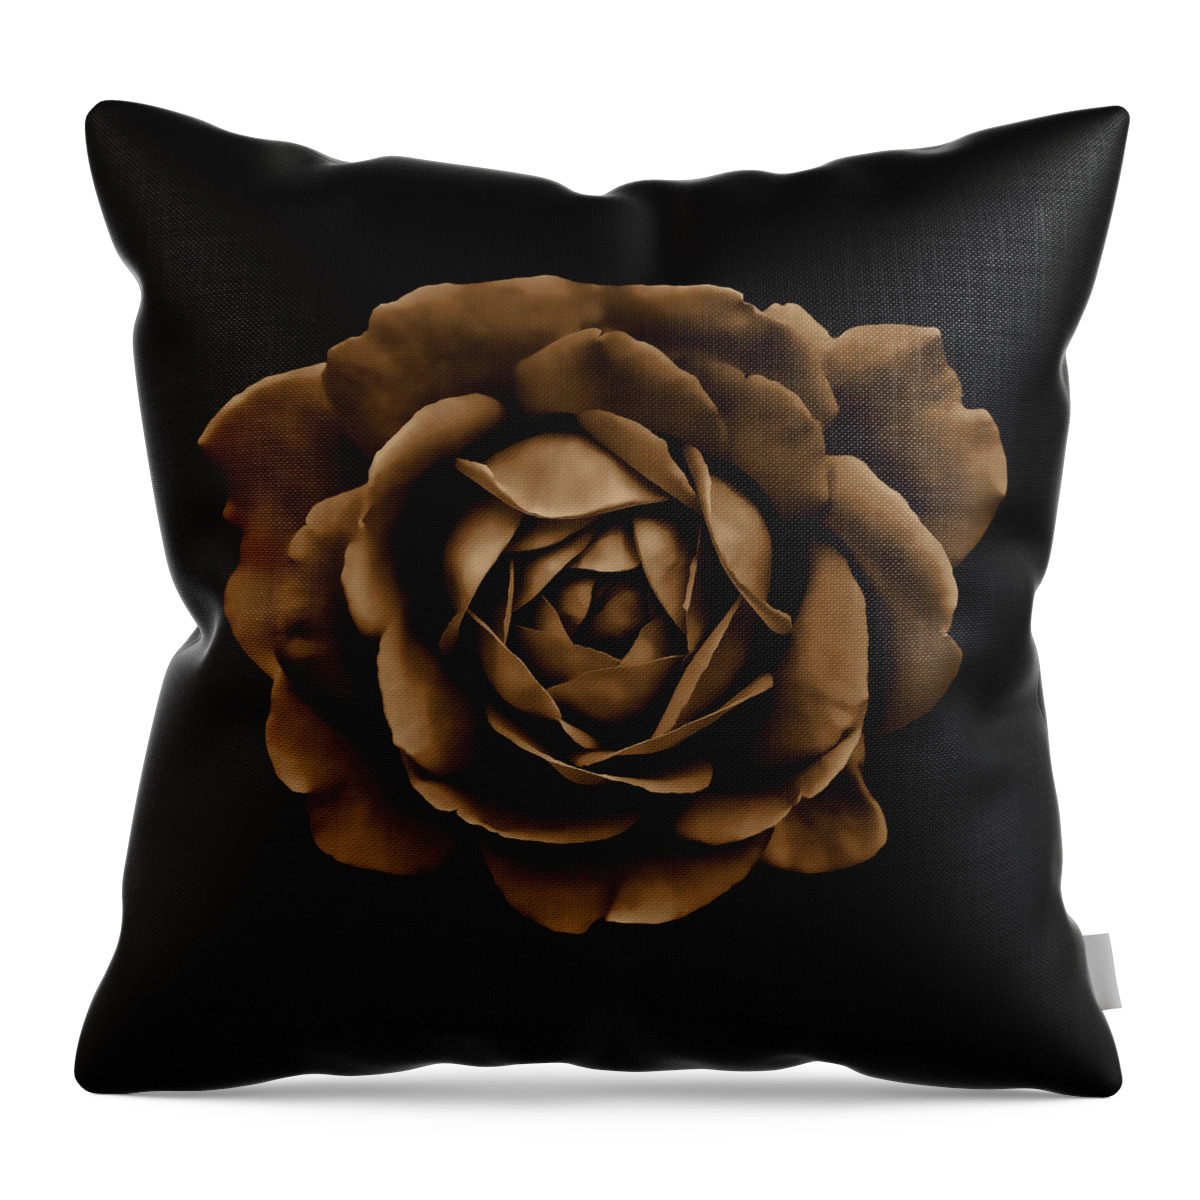 Rose Throw Pillow featuring the photograph Dramatic Brown Rose Portrait by Jennie Marie Schell